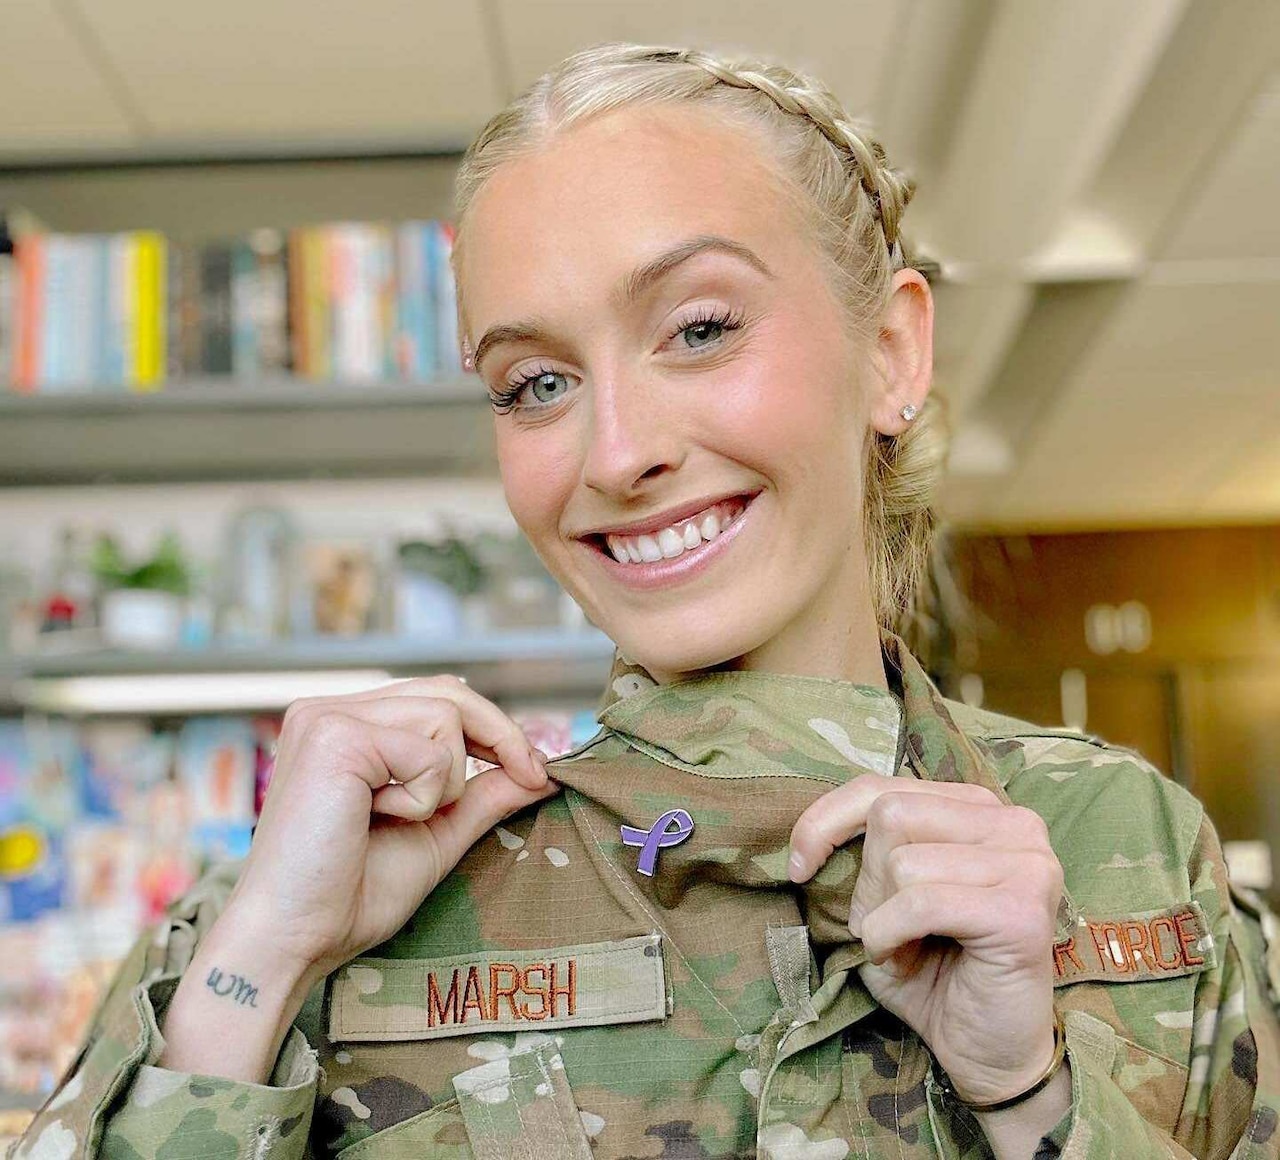 A smiling woman shows off a purple ribbon pin on her uniform.